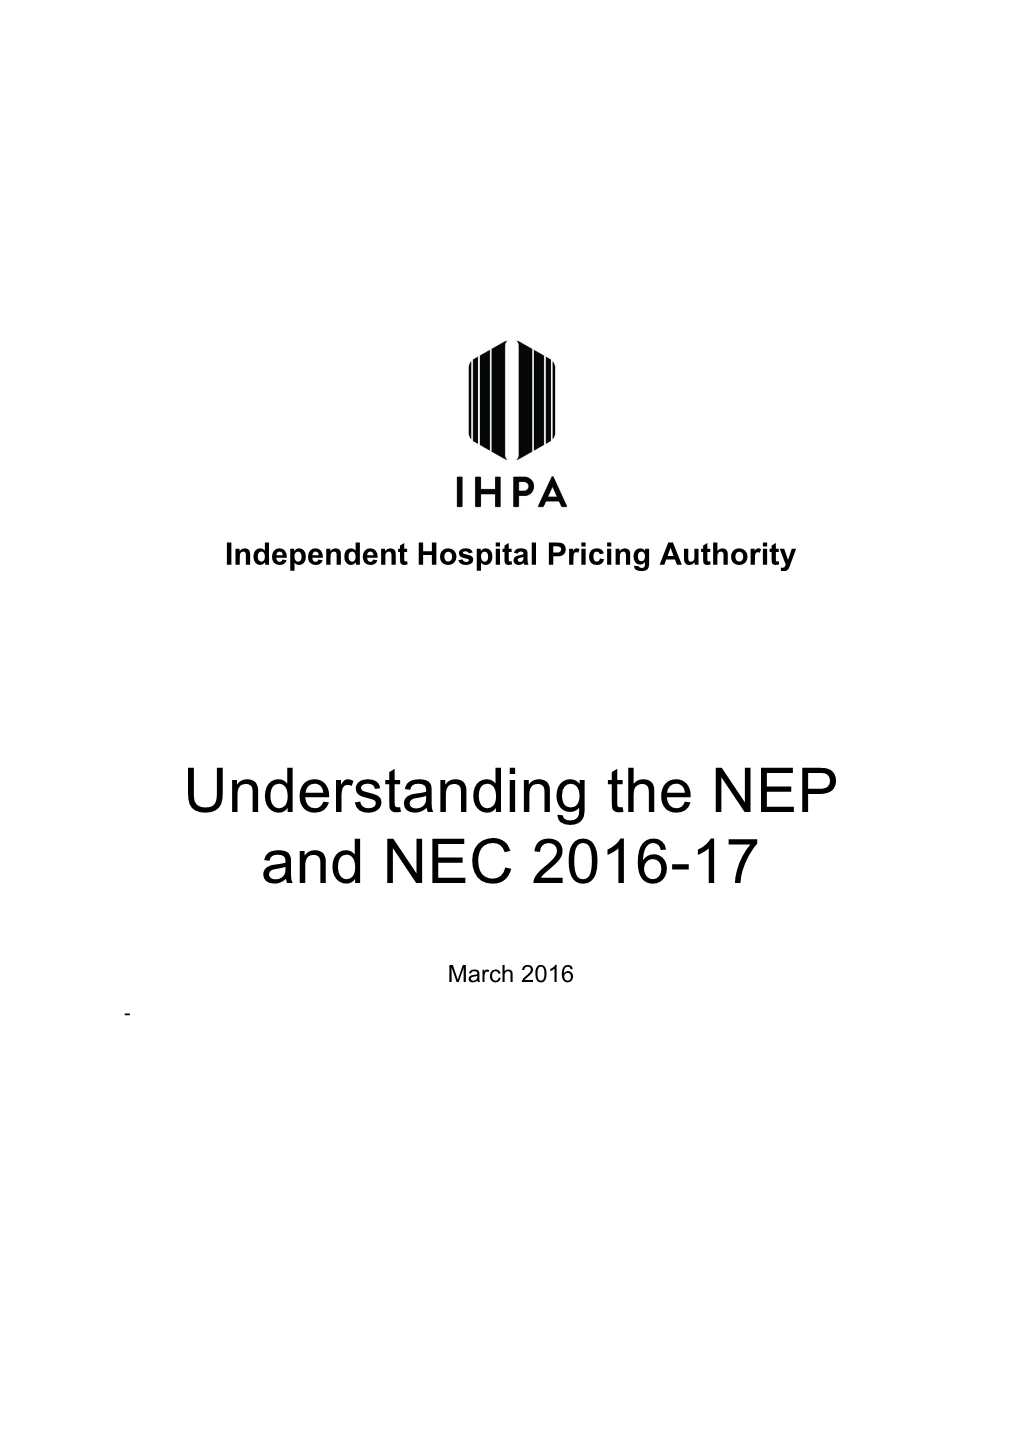 Understanding the NEP and NEC 2016-17